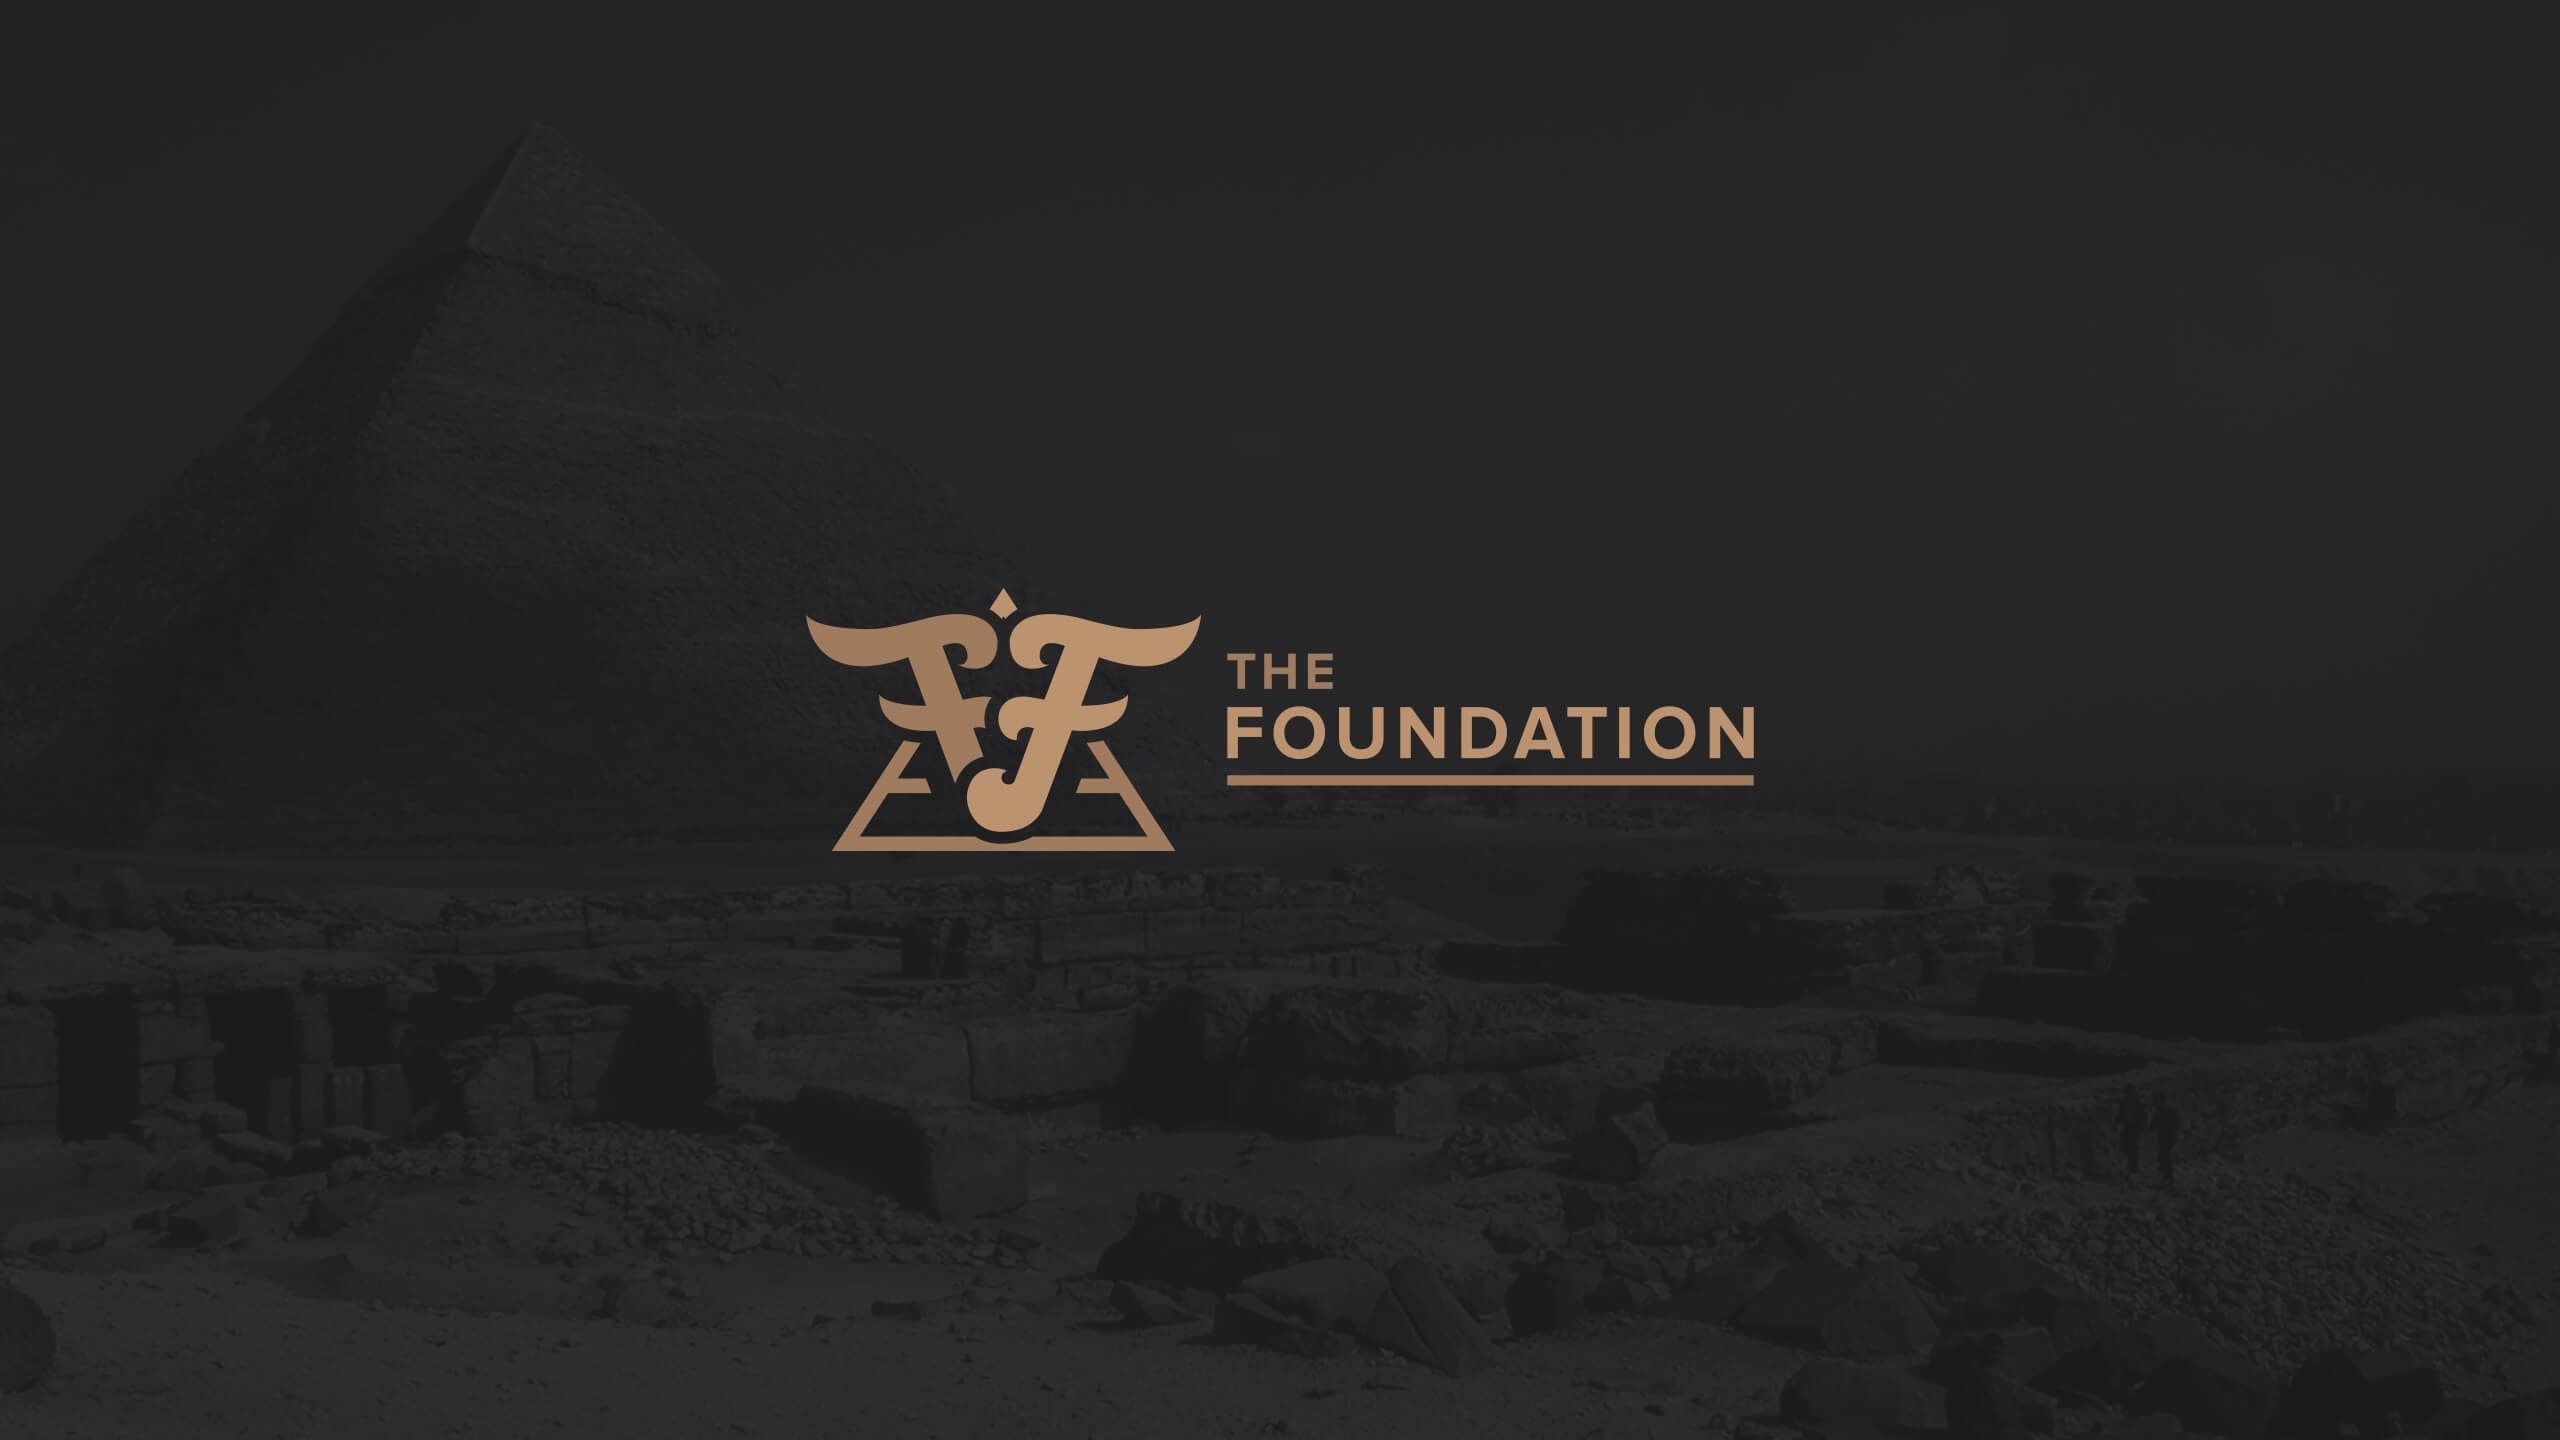 [The] Foundation